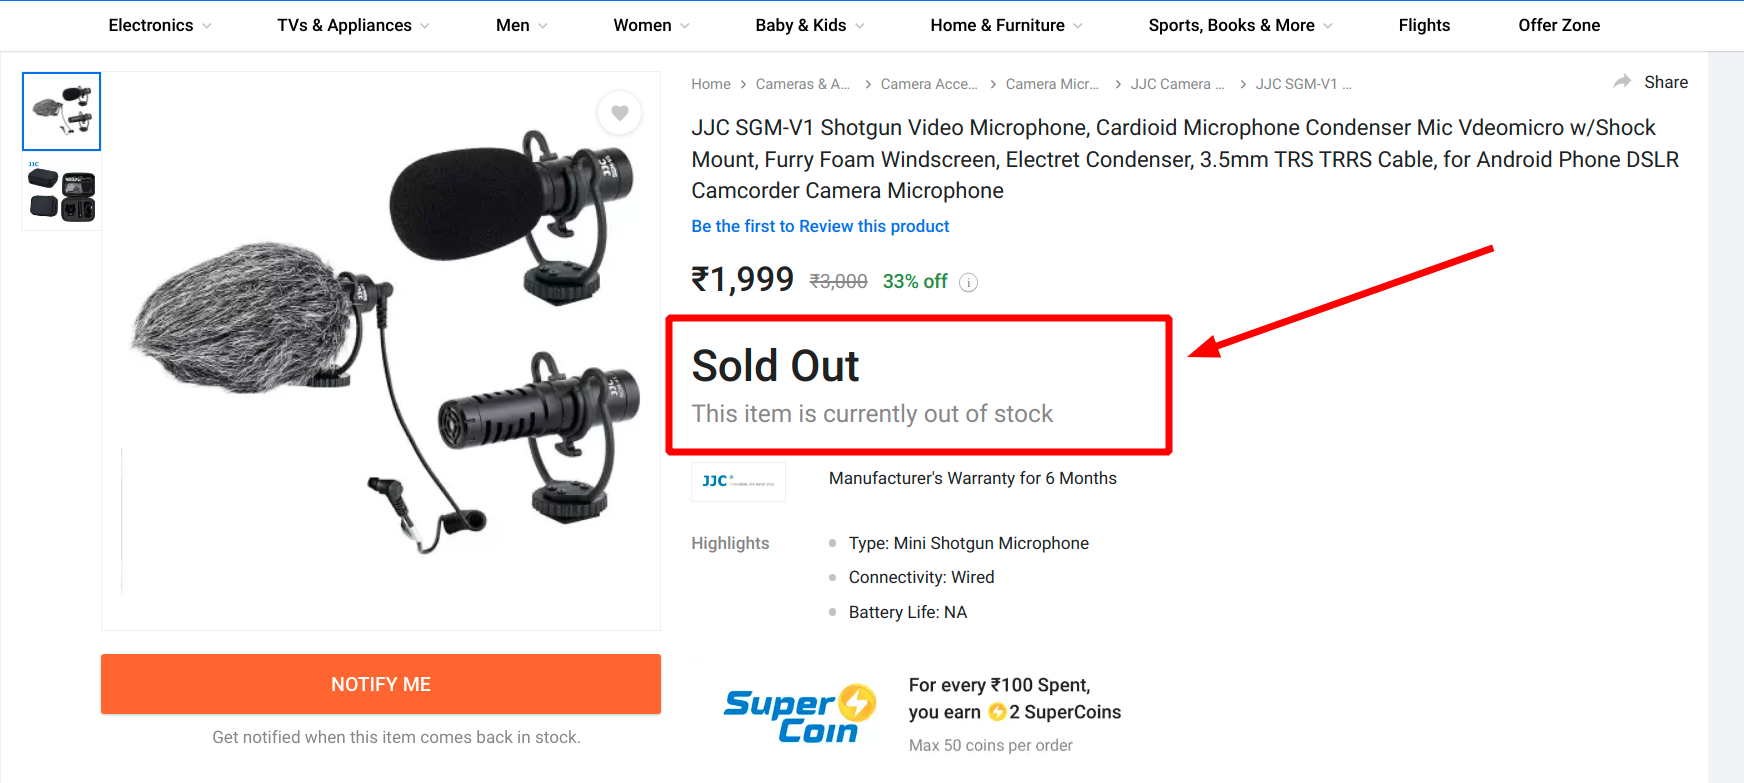 out of stock product - cannot solve user's problem